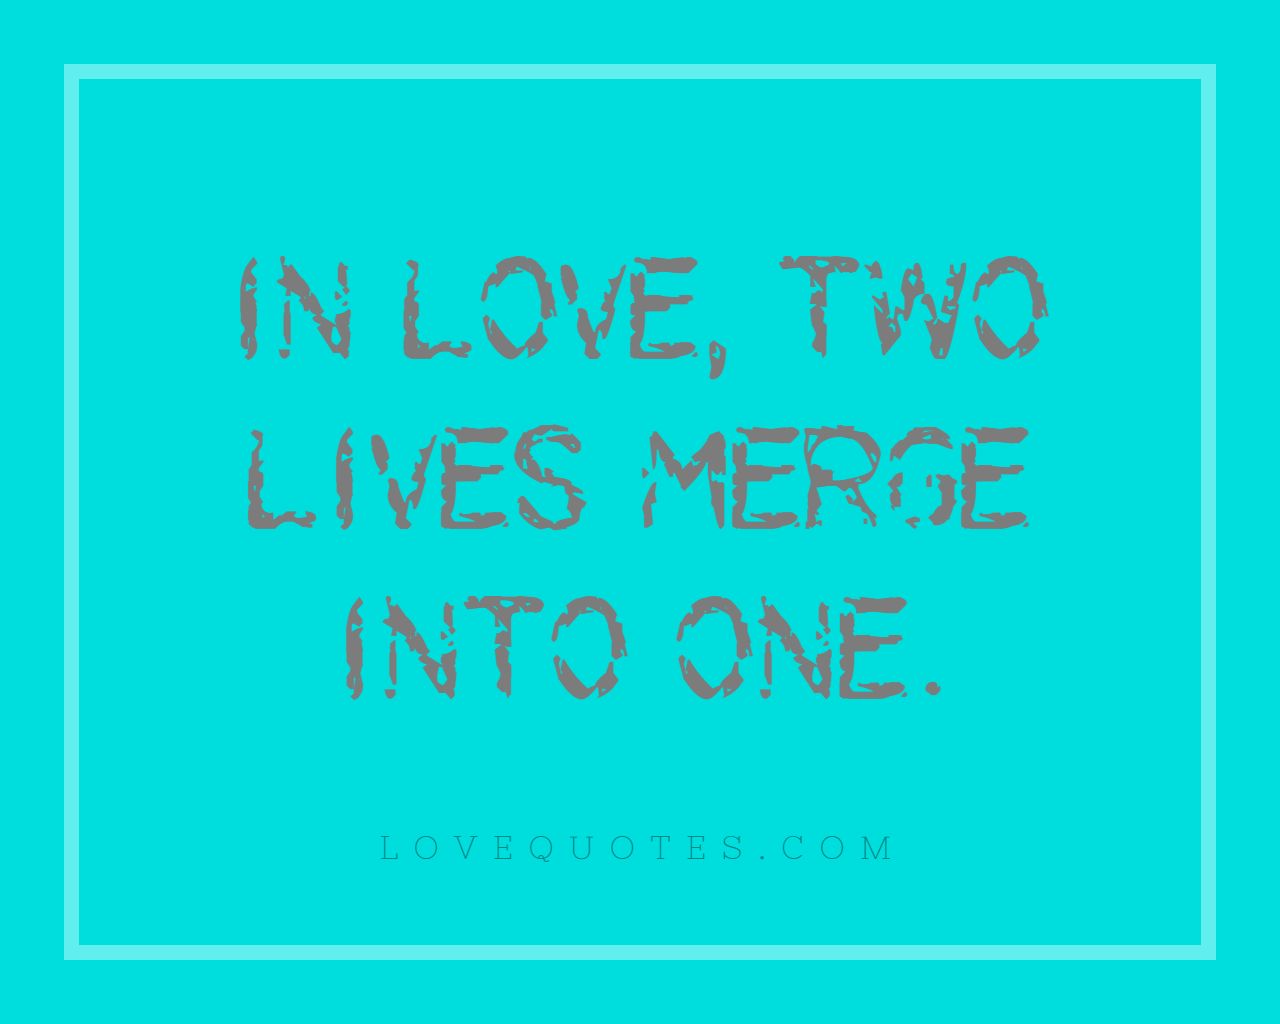 Two Lives Merge